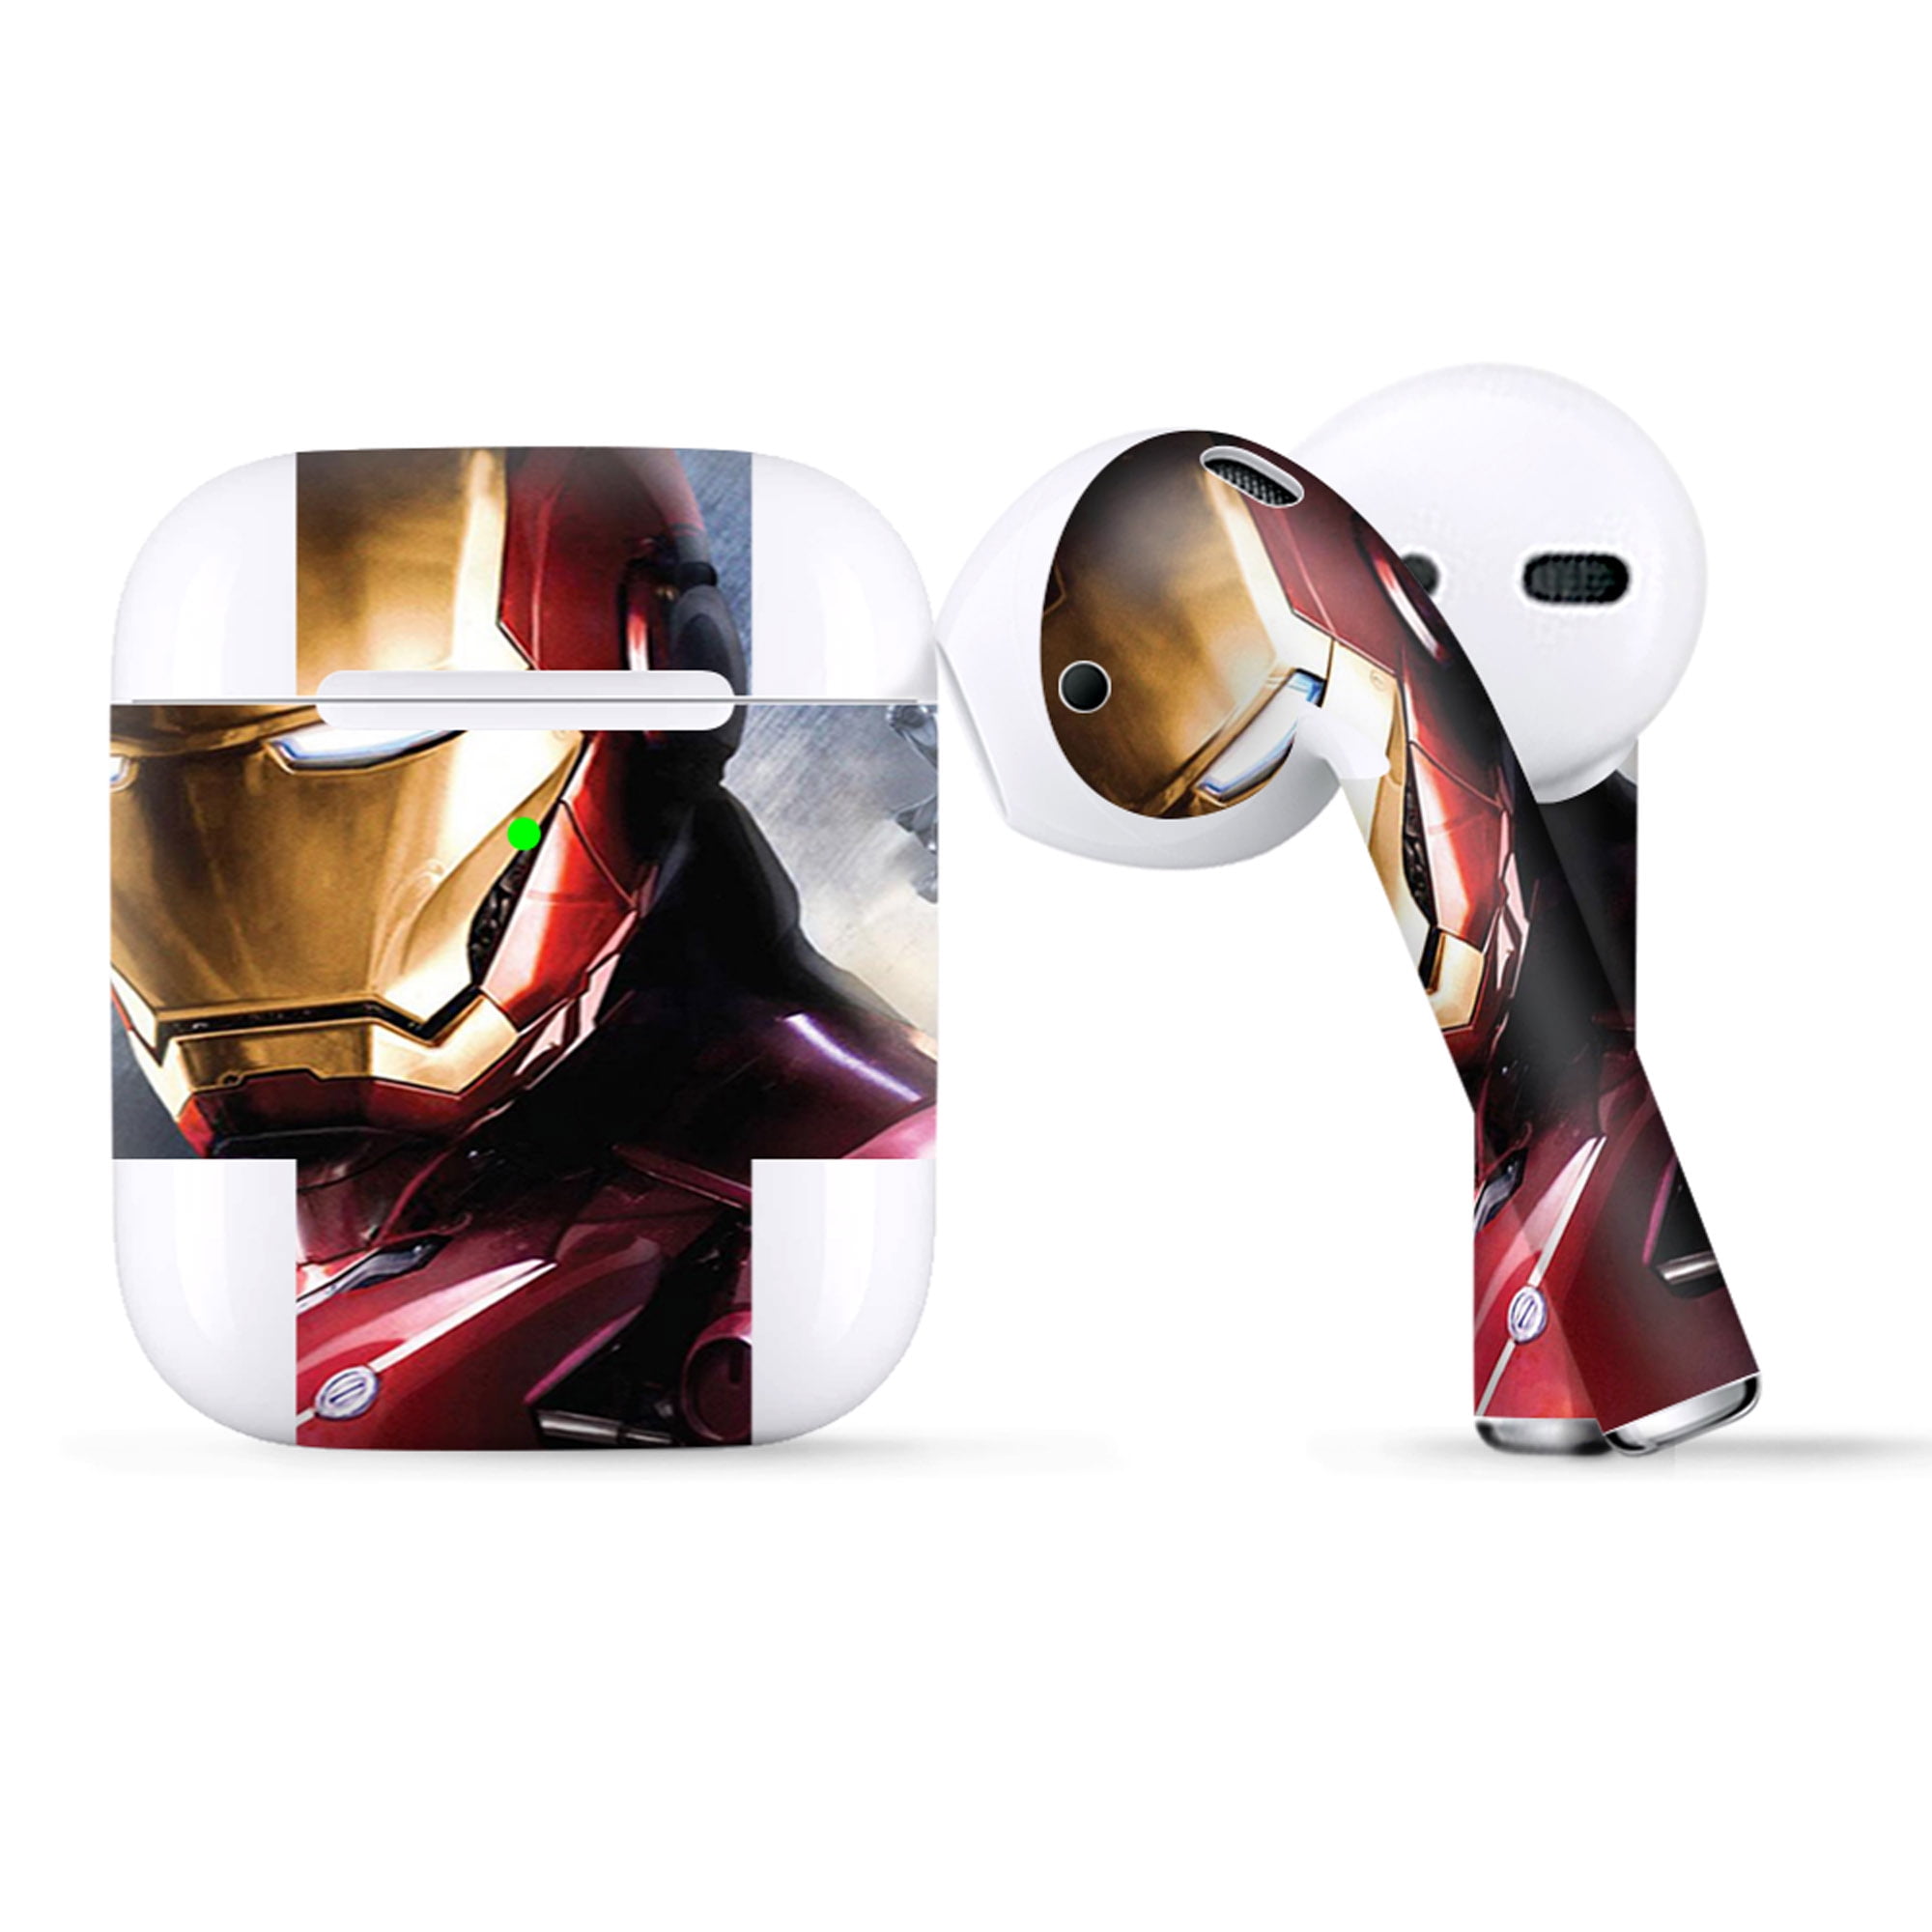 Protective Skin Wrap for Apple AirPods, Vinyl Sticker Cover Decal, Iron Man Guy